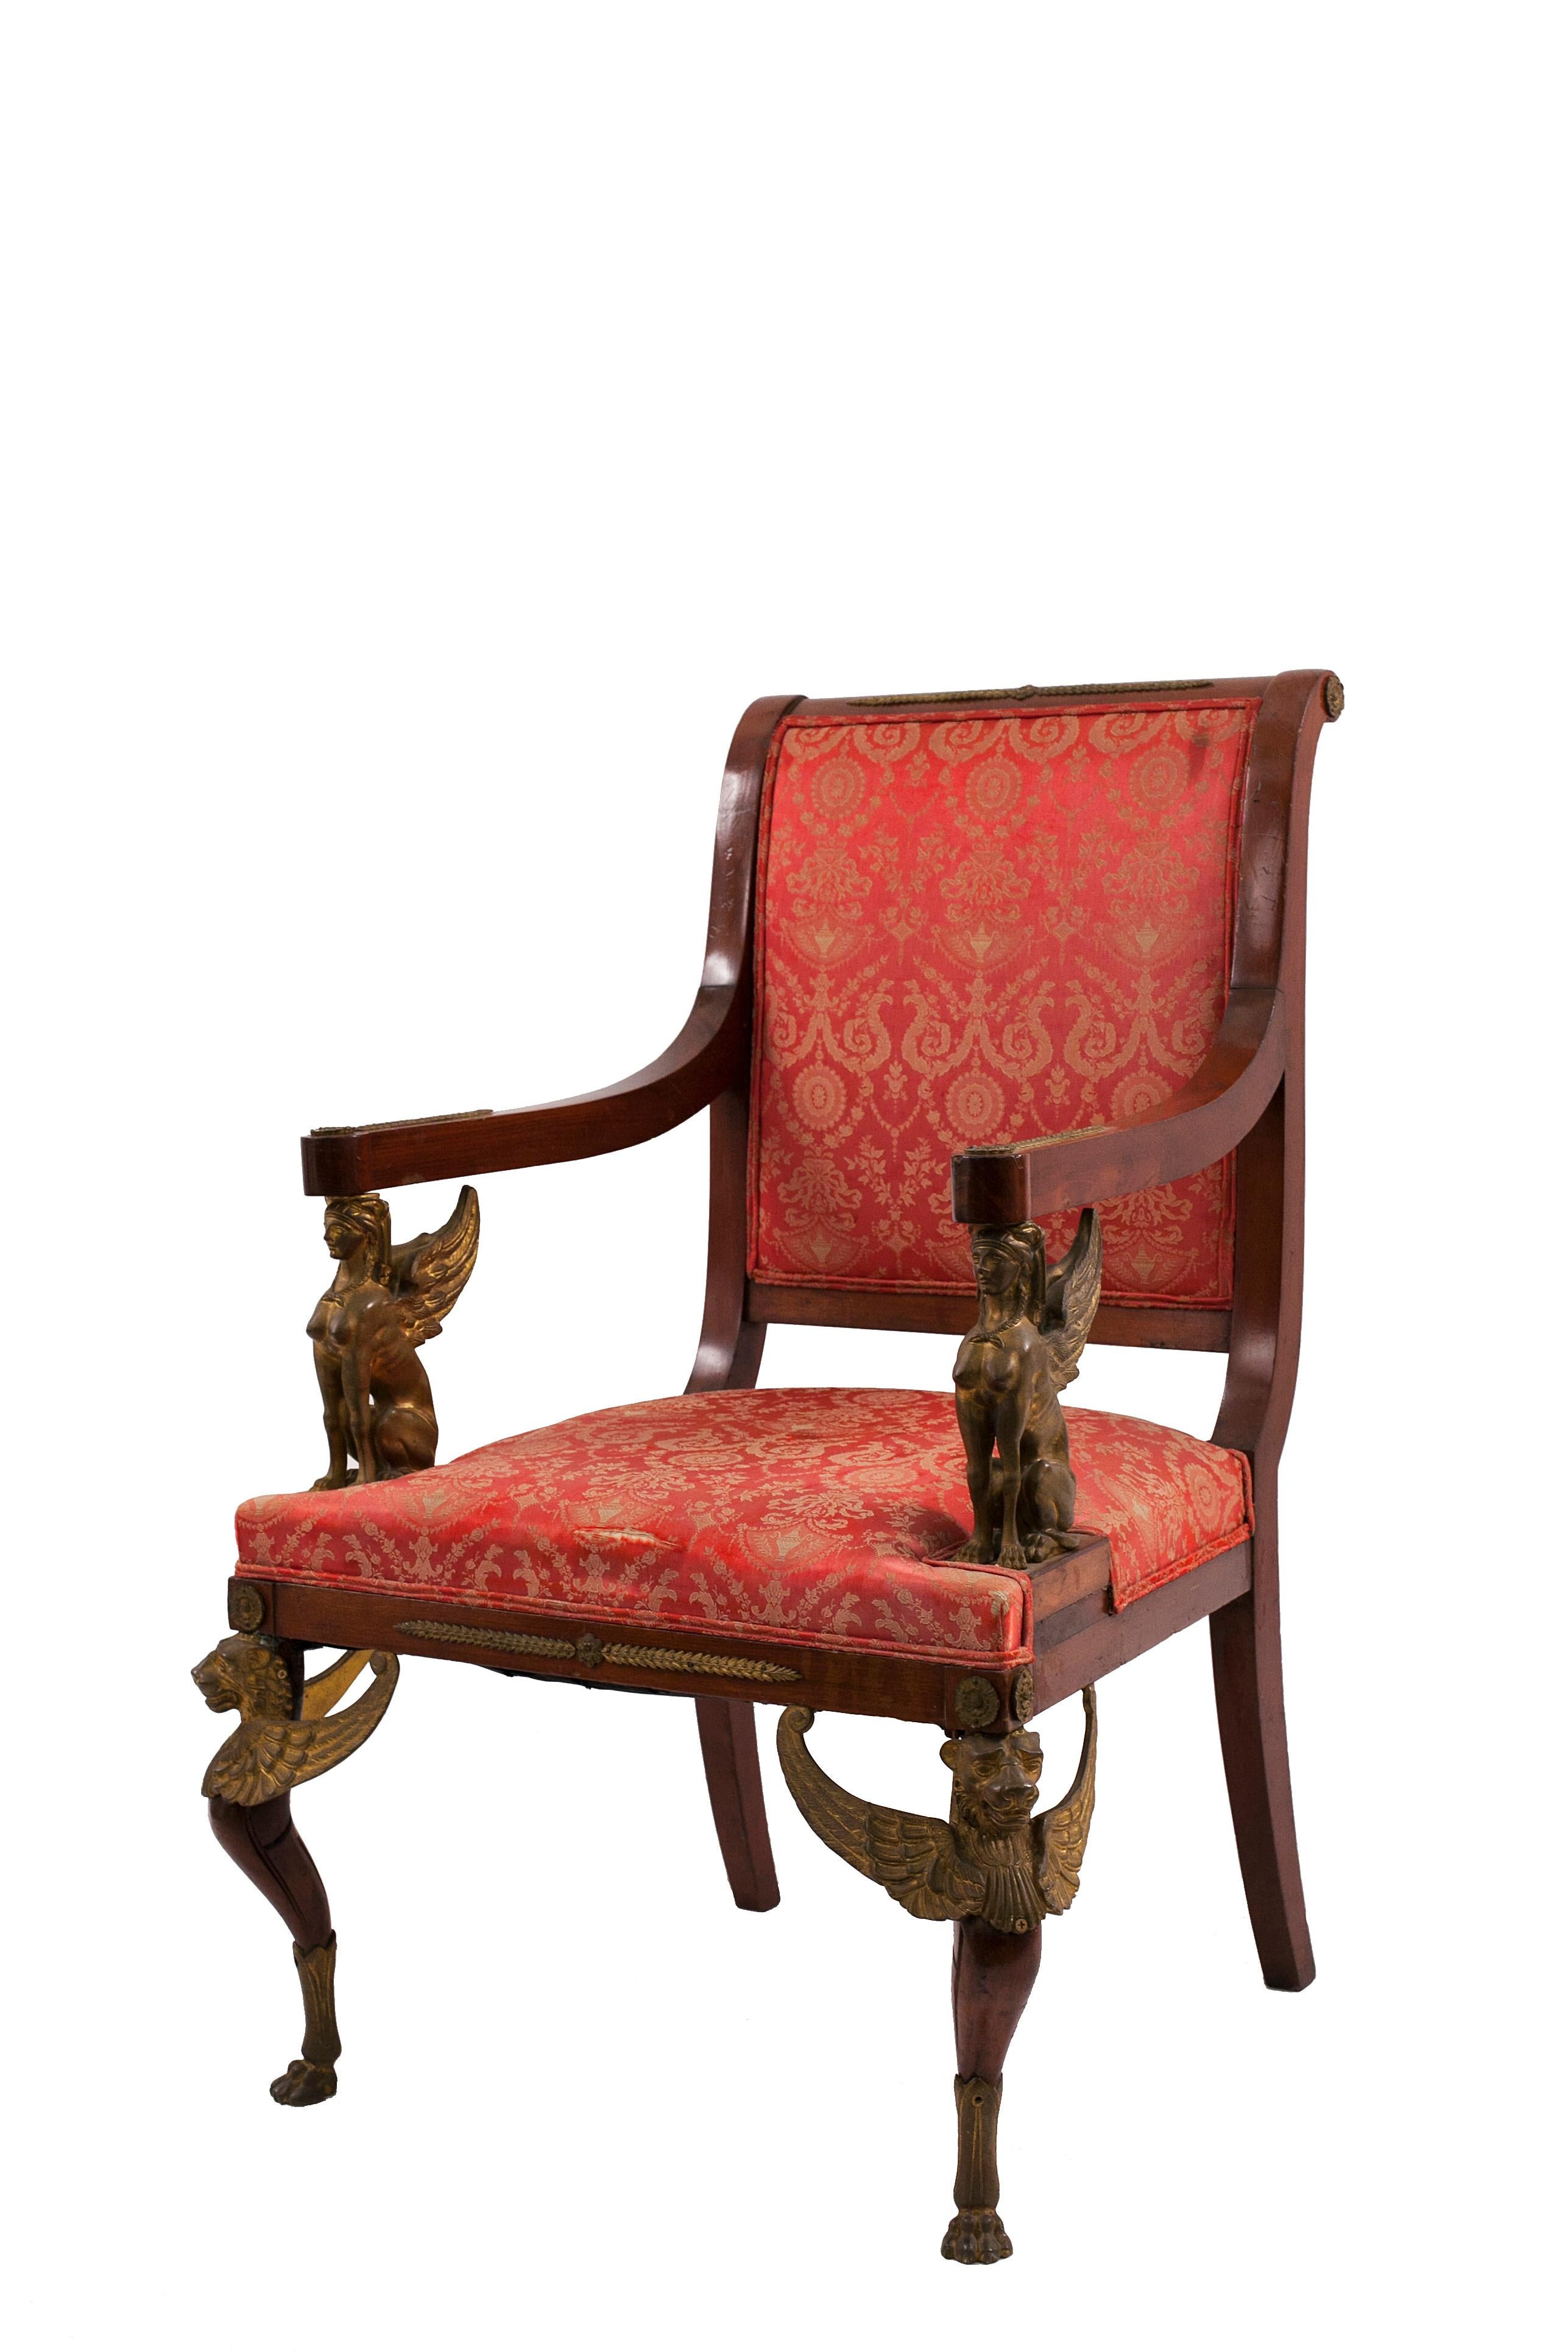 Set of 5 French Empire-style (19th century) mahogany salon or living room set with bronze trim and red damask upholstery. 

Measurements:

2 arms 27½